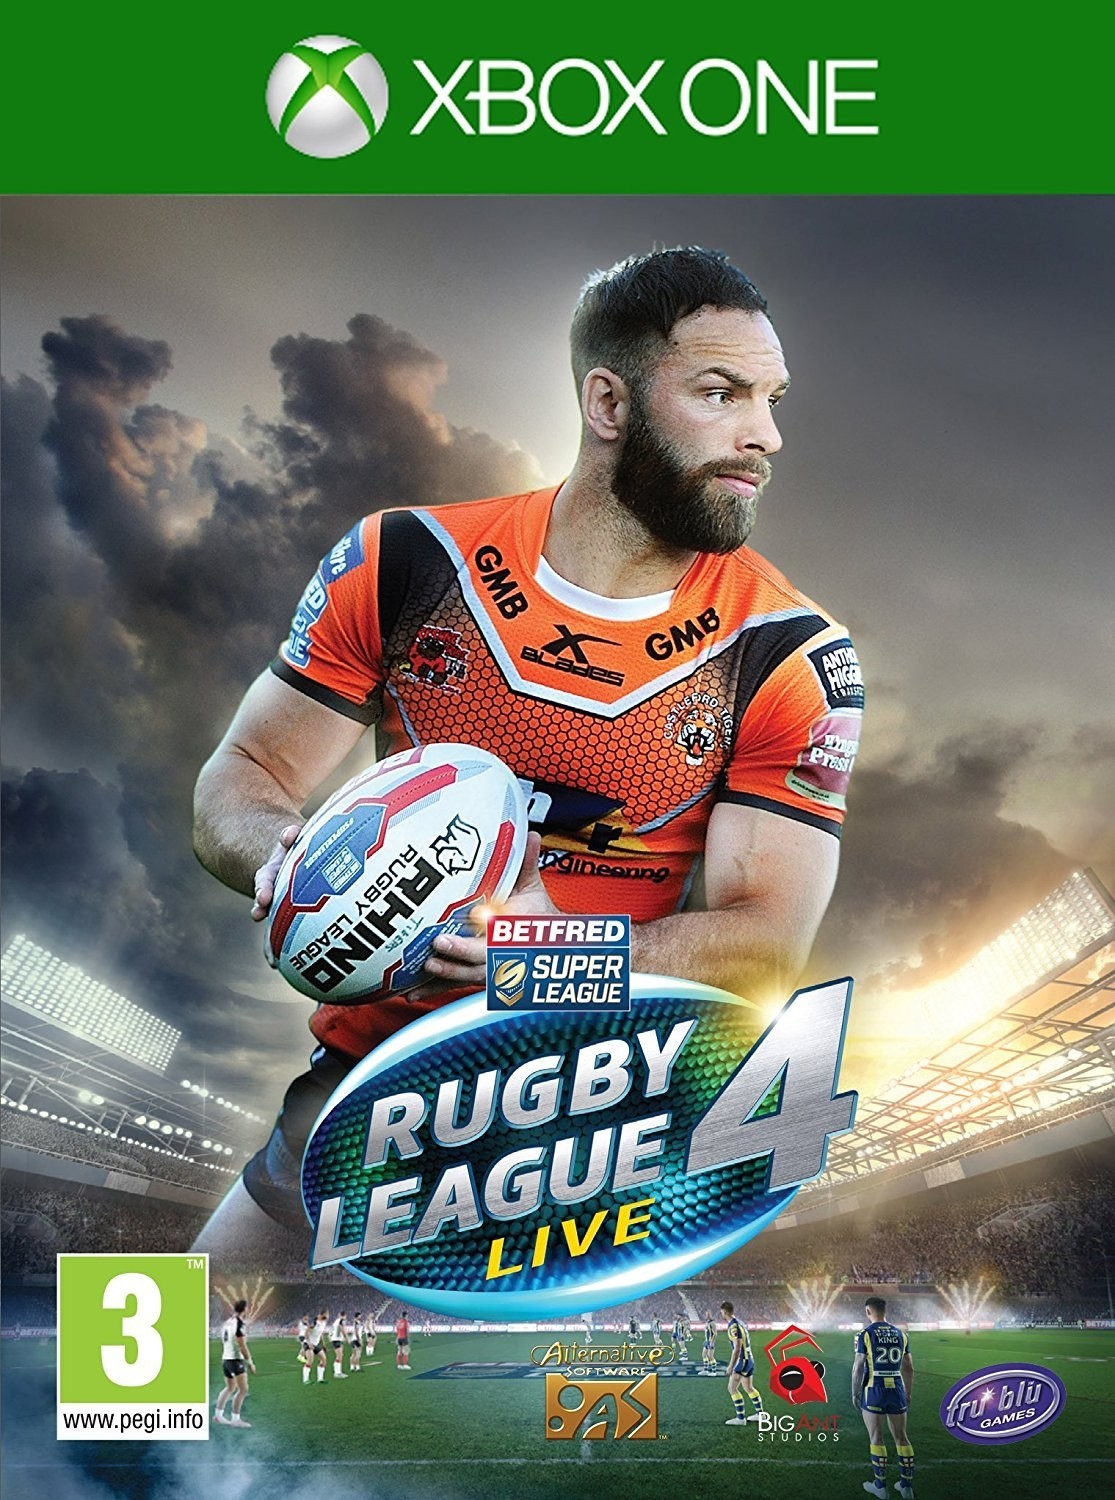 Rugby League Live 4 (Xbox One), Big Ant Studios